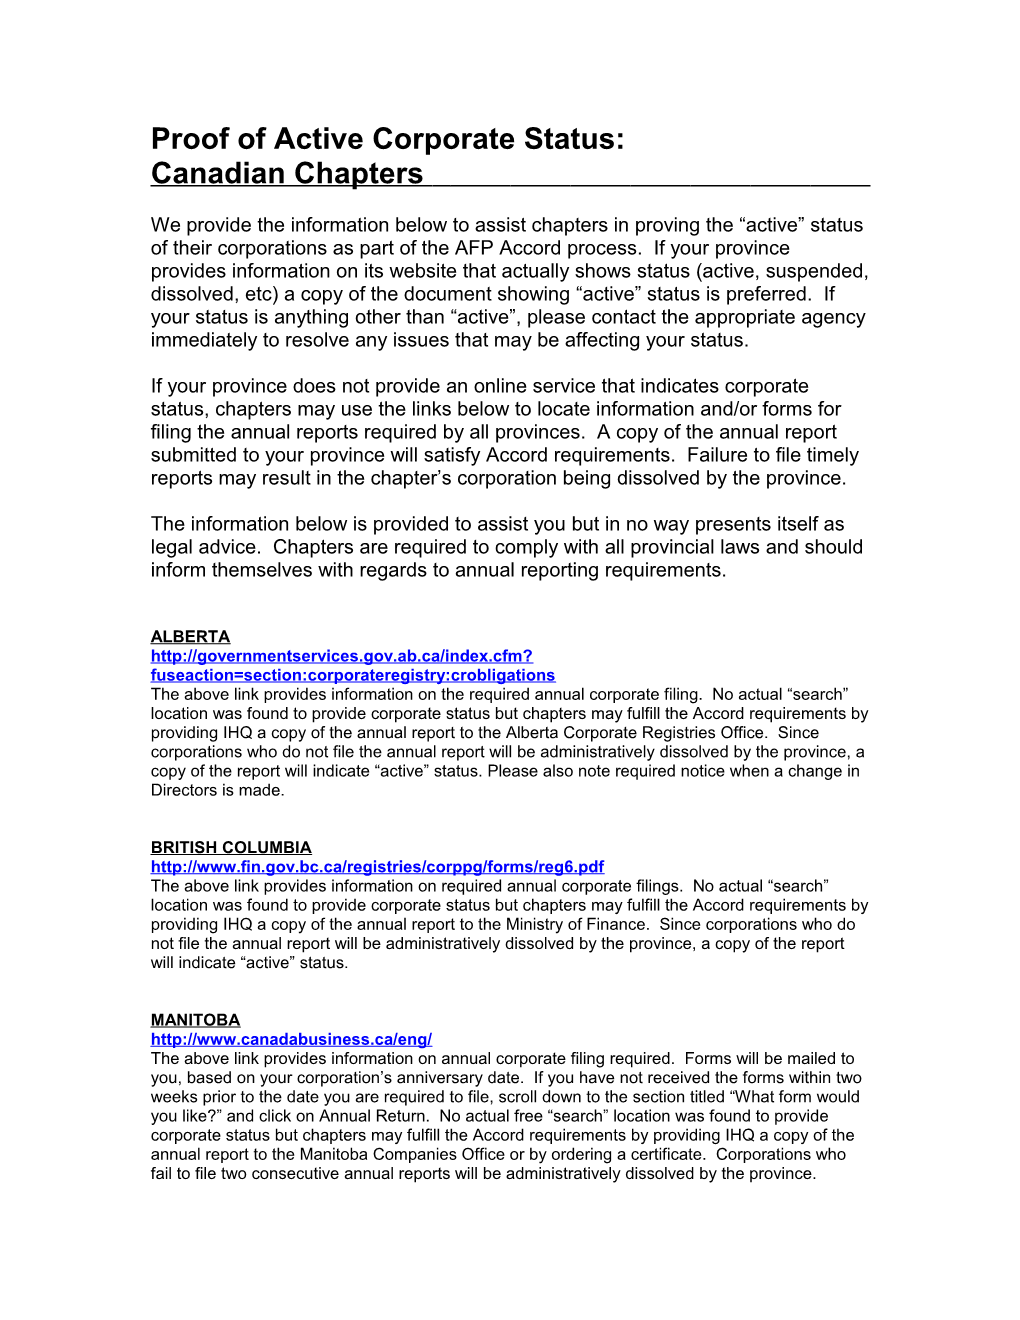 Proof of Active Status-Canadian Chapters